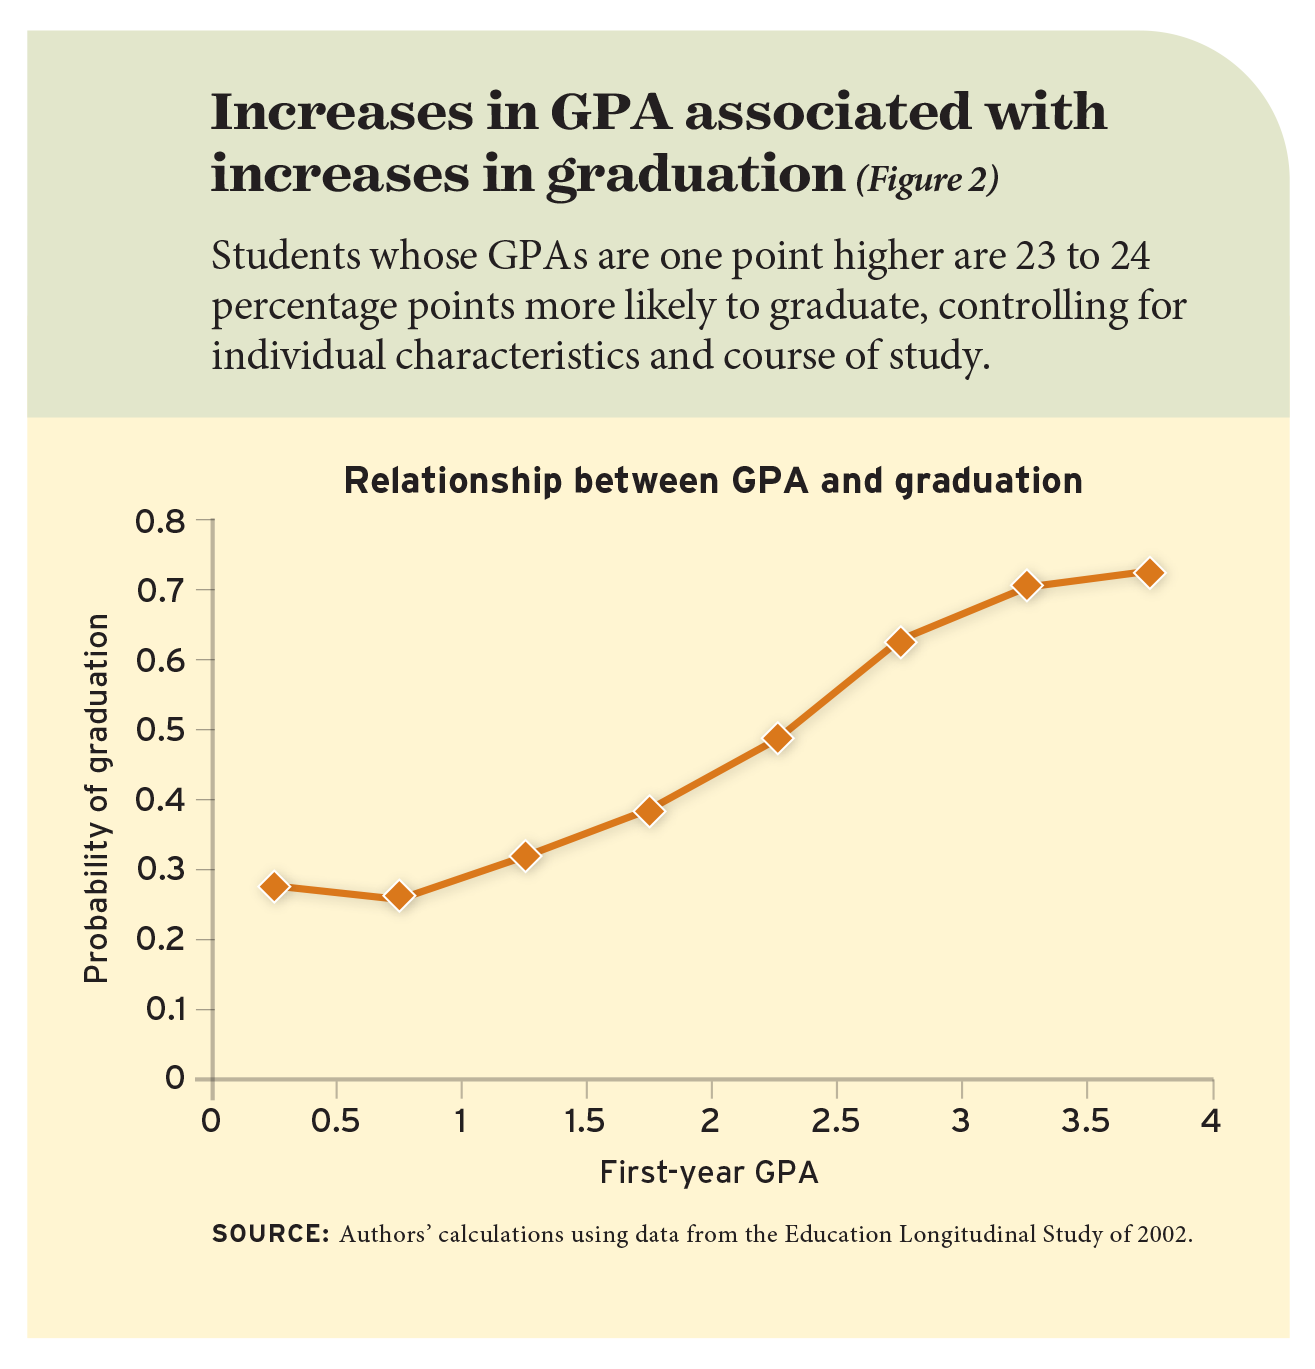 Figure 2: Increases in GPA associated with increases in graduation